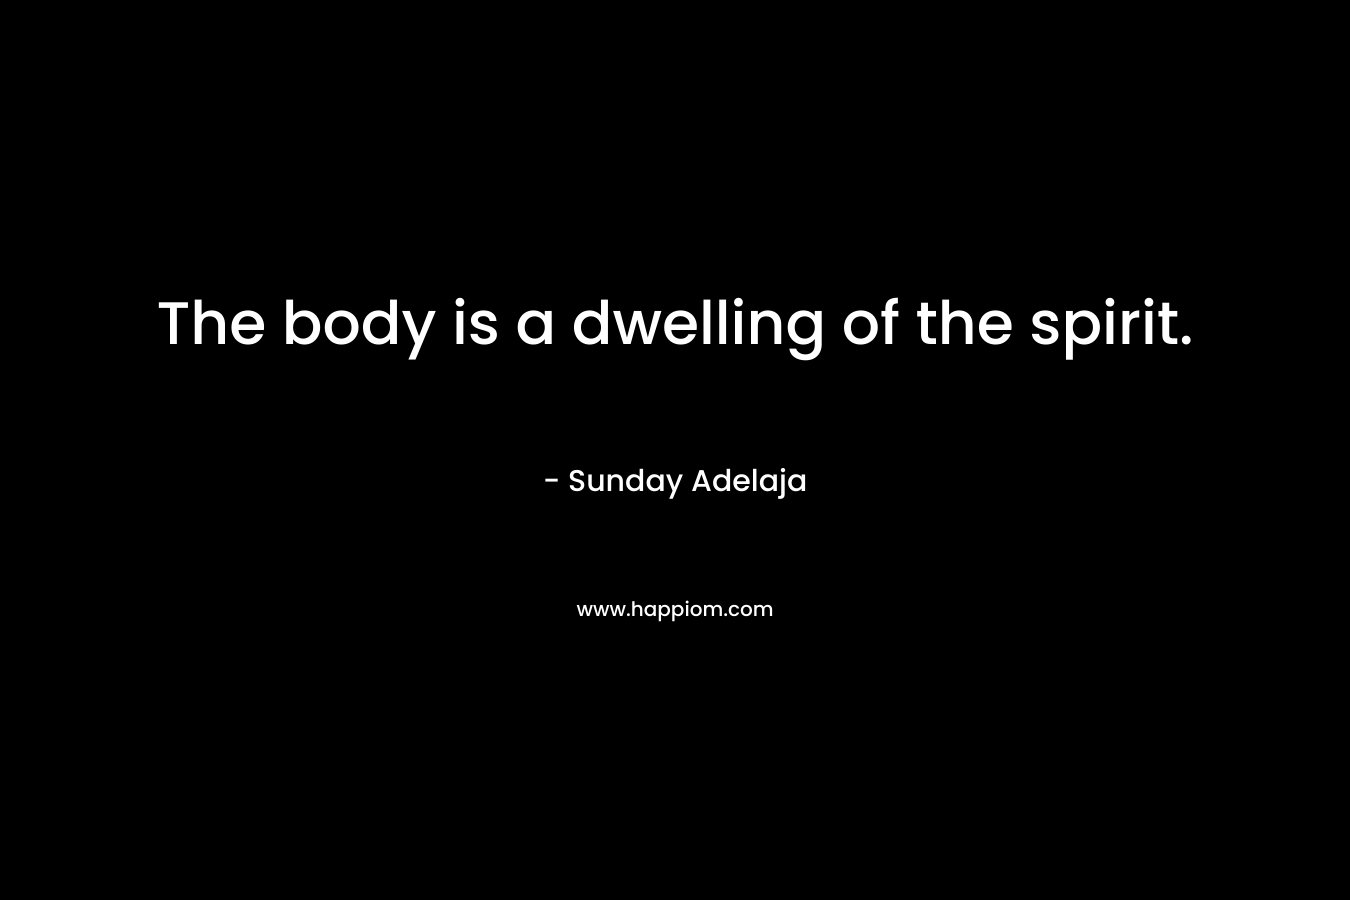 The body is a dwelling of the spirit.